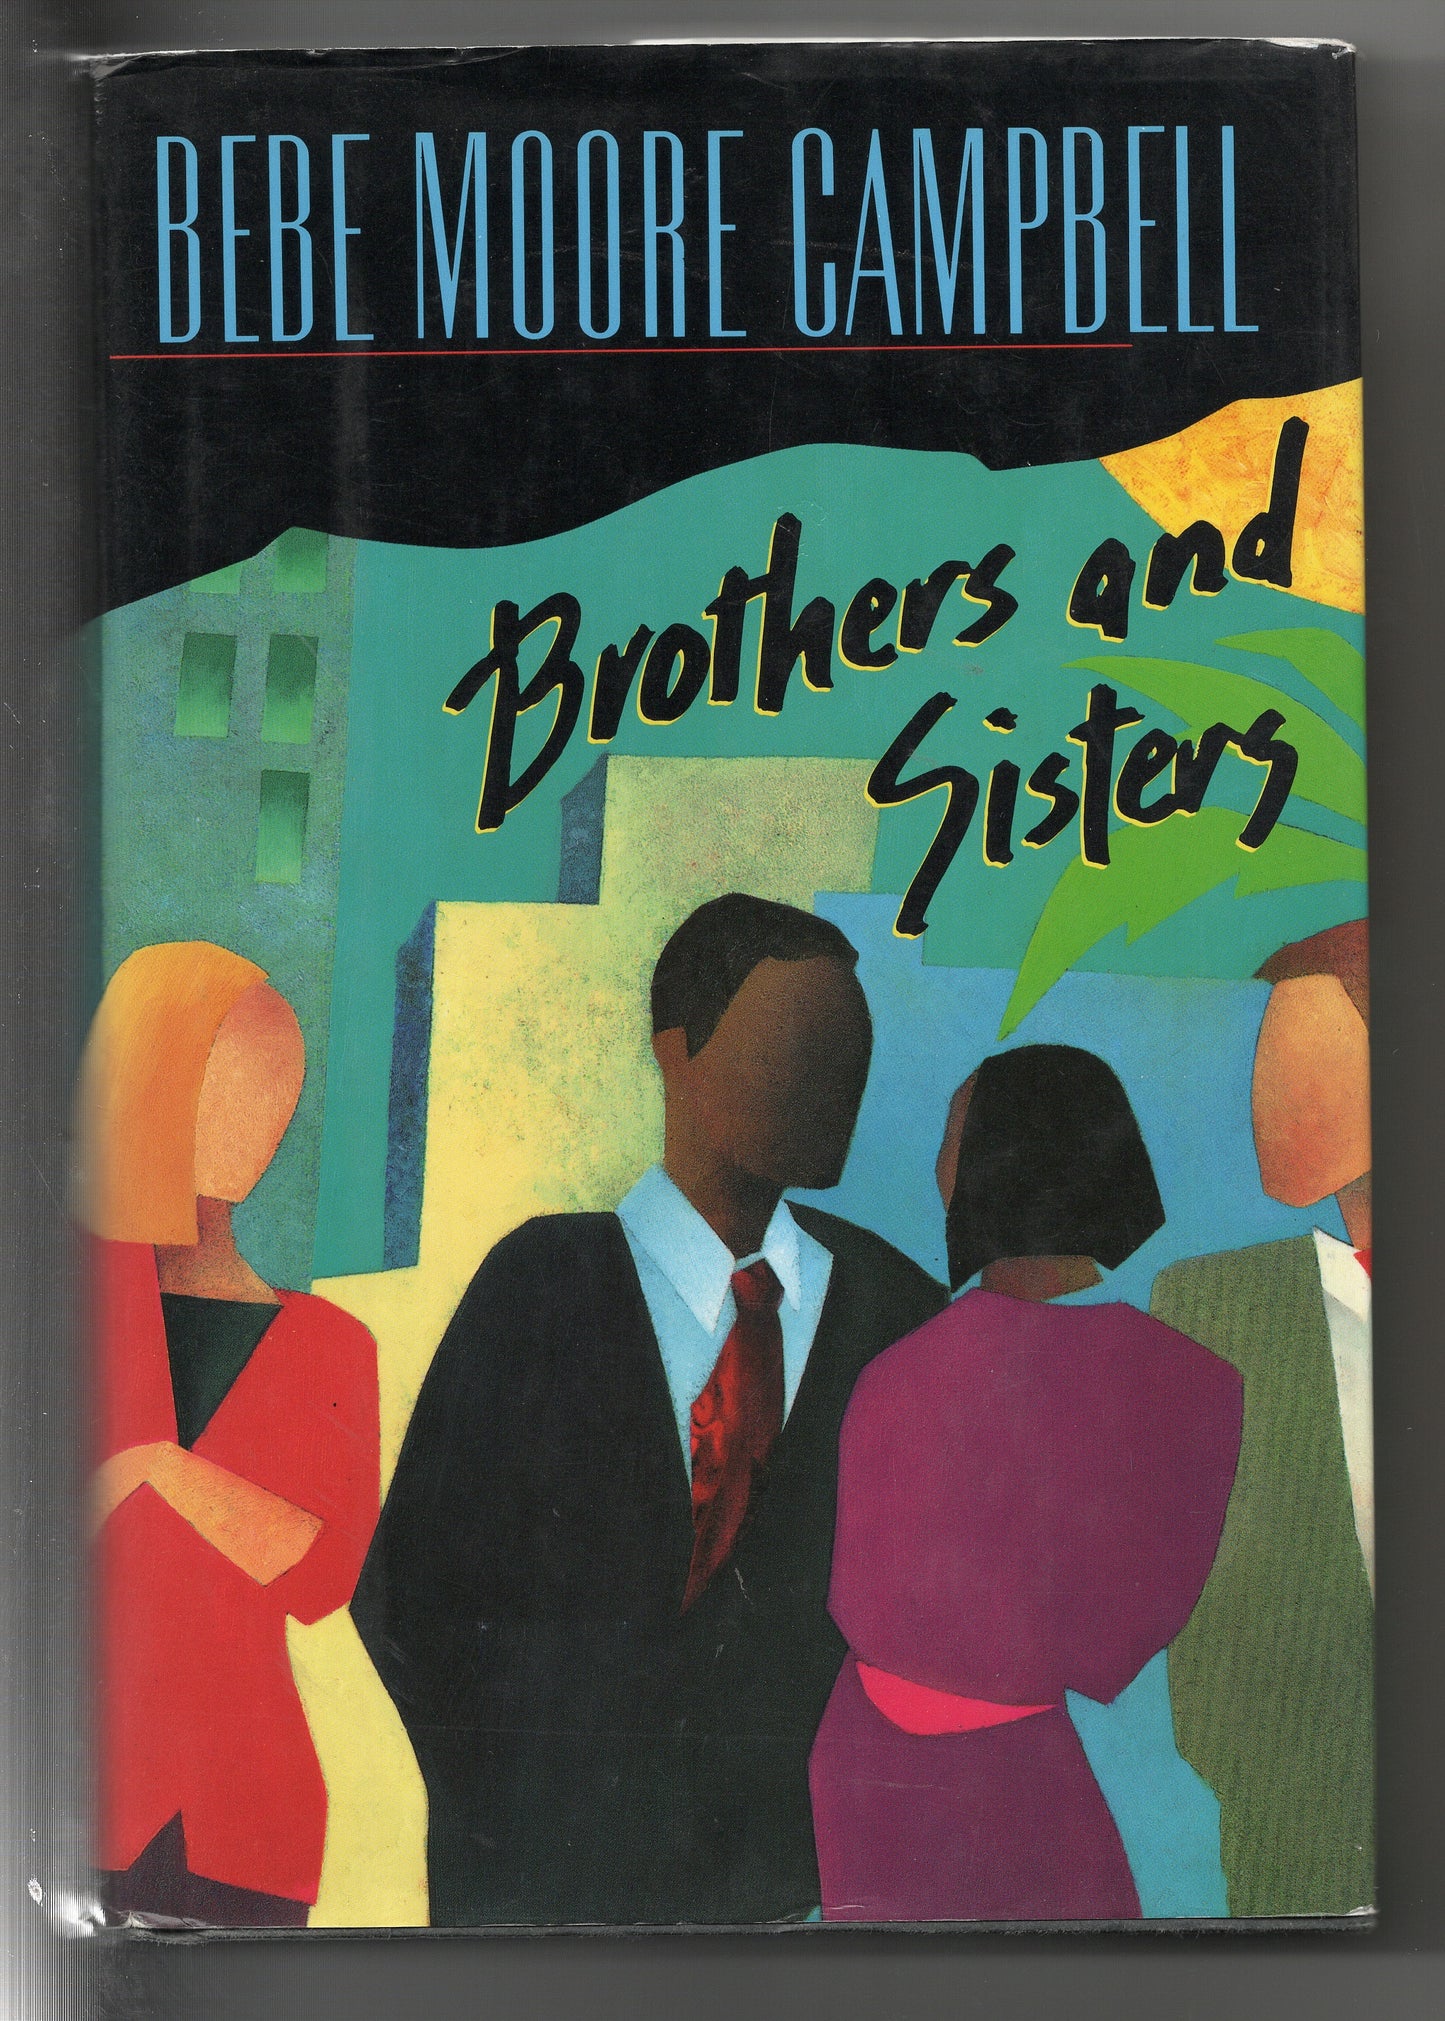 BeBe Moore Campbell HC Brothers and Sisters